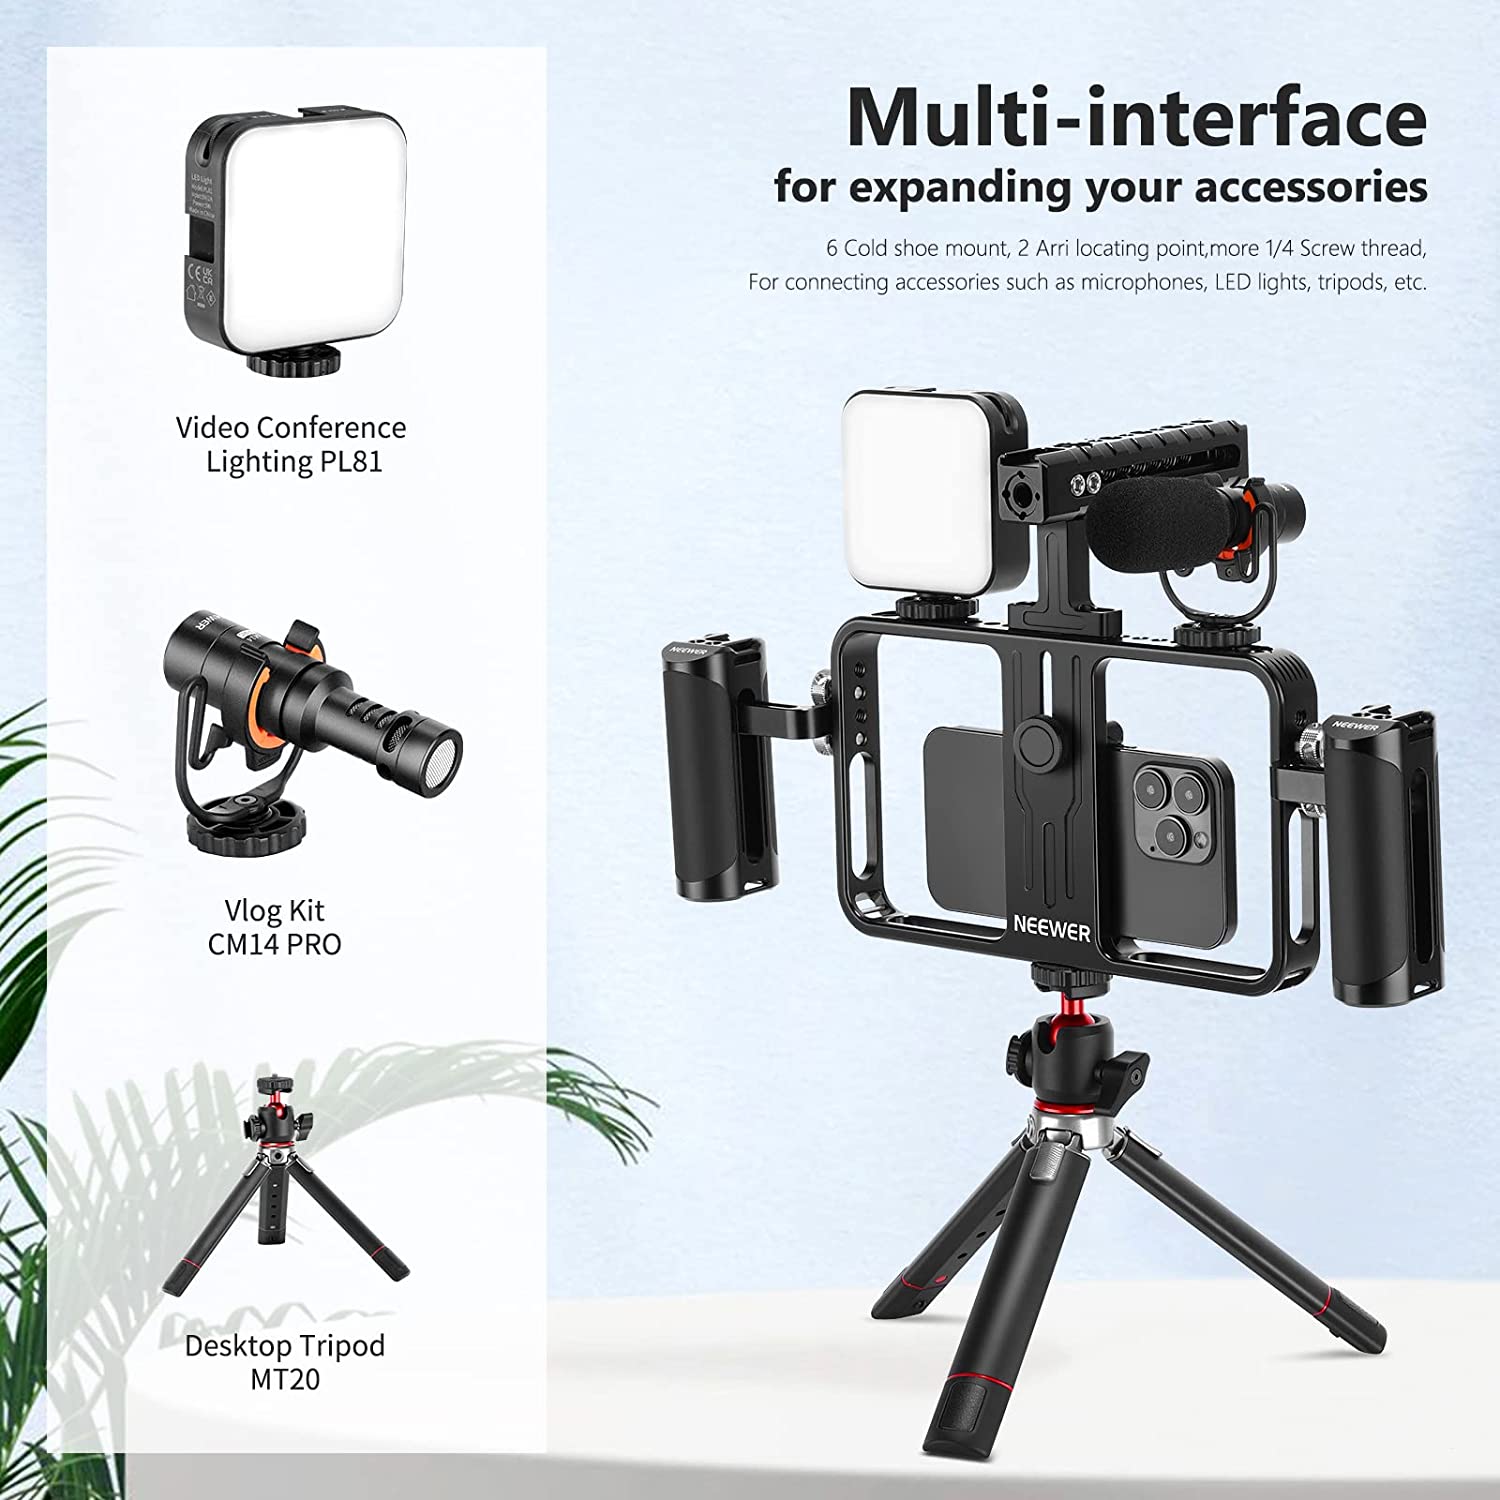 Neewer LED Video Conference Light Kit with Clip & Phone Holder for